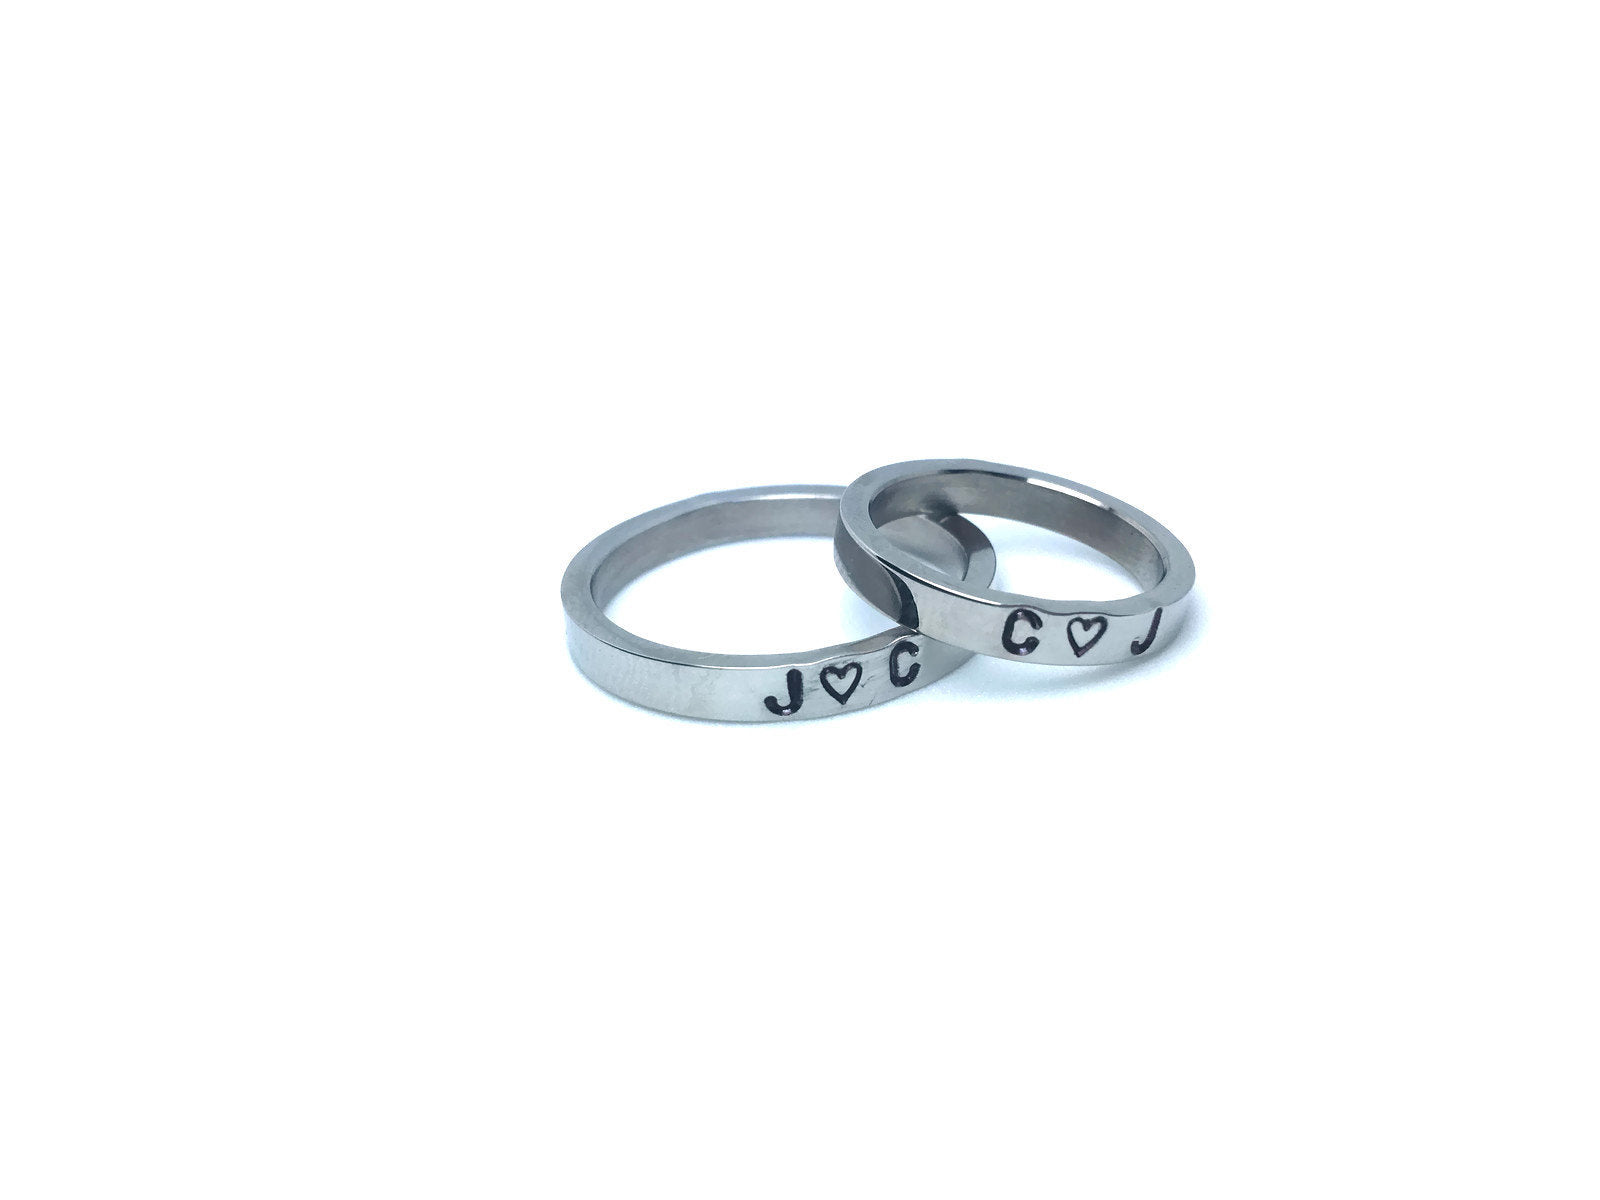 Matching set of Personalized Rings, Couples rings Silver Gold Stainles–  LillaDesigns